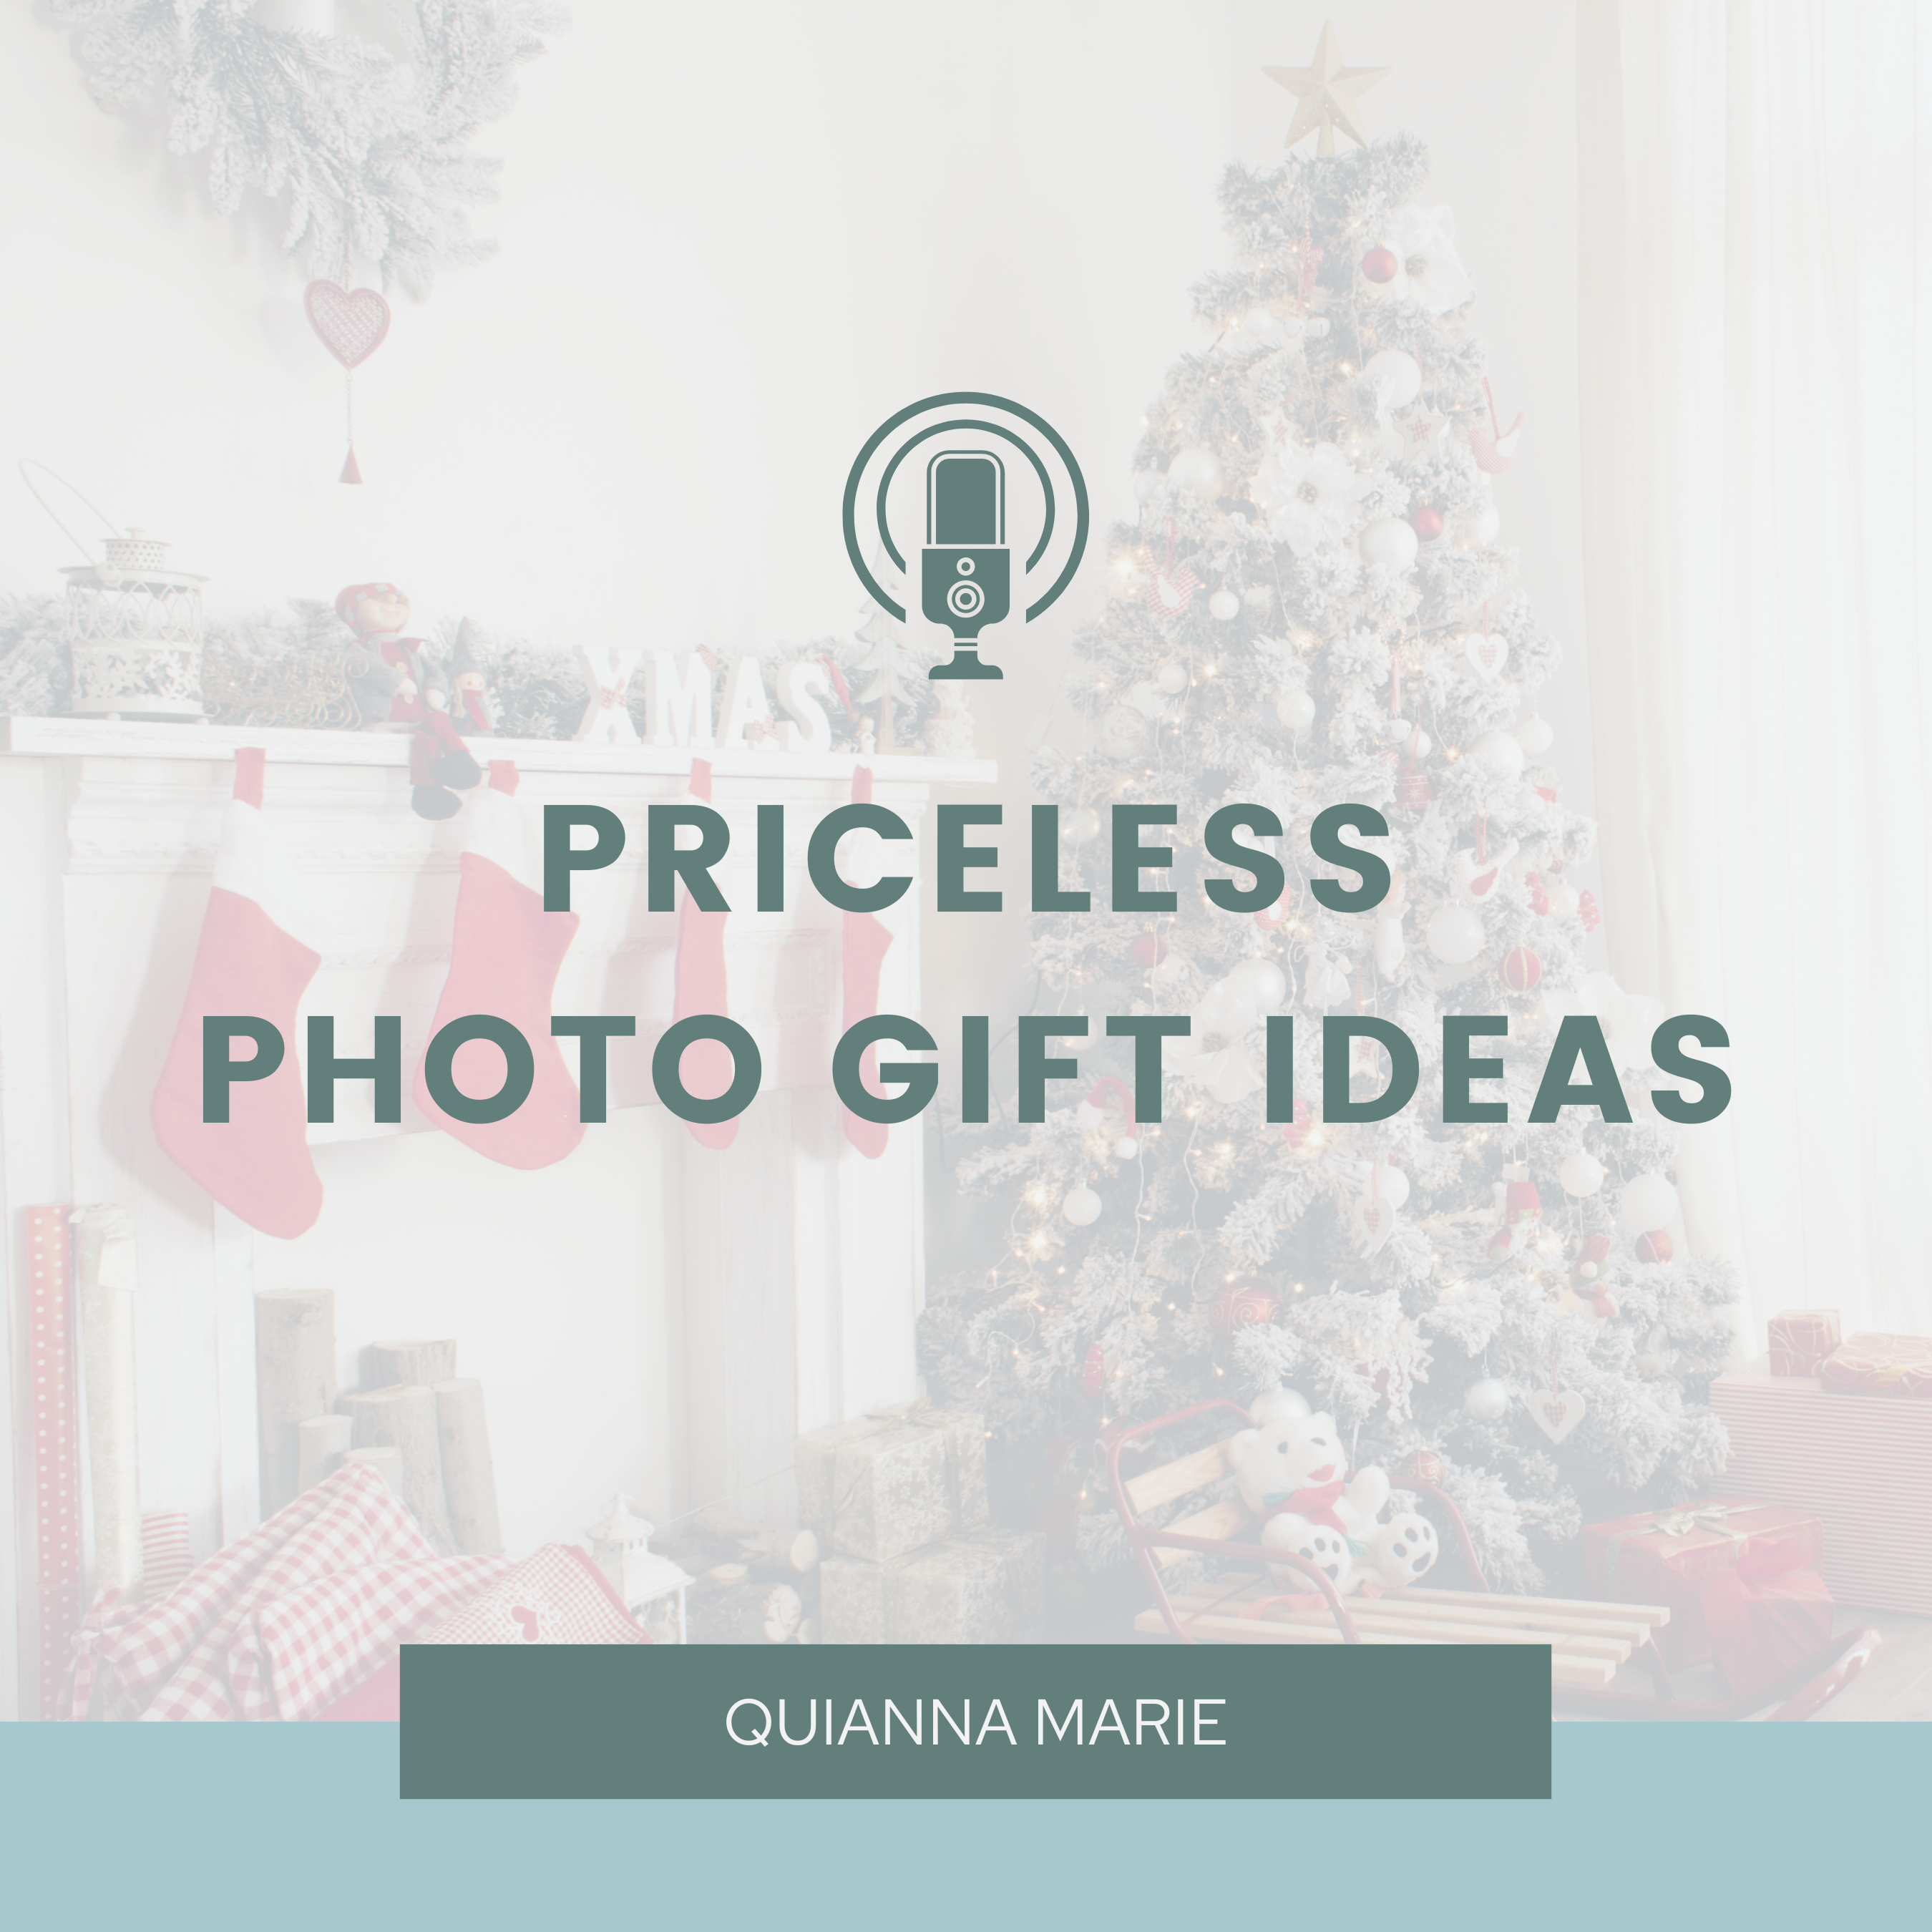 Printing Photo Gift Ideas with Quianna Marie Weekly Podcast